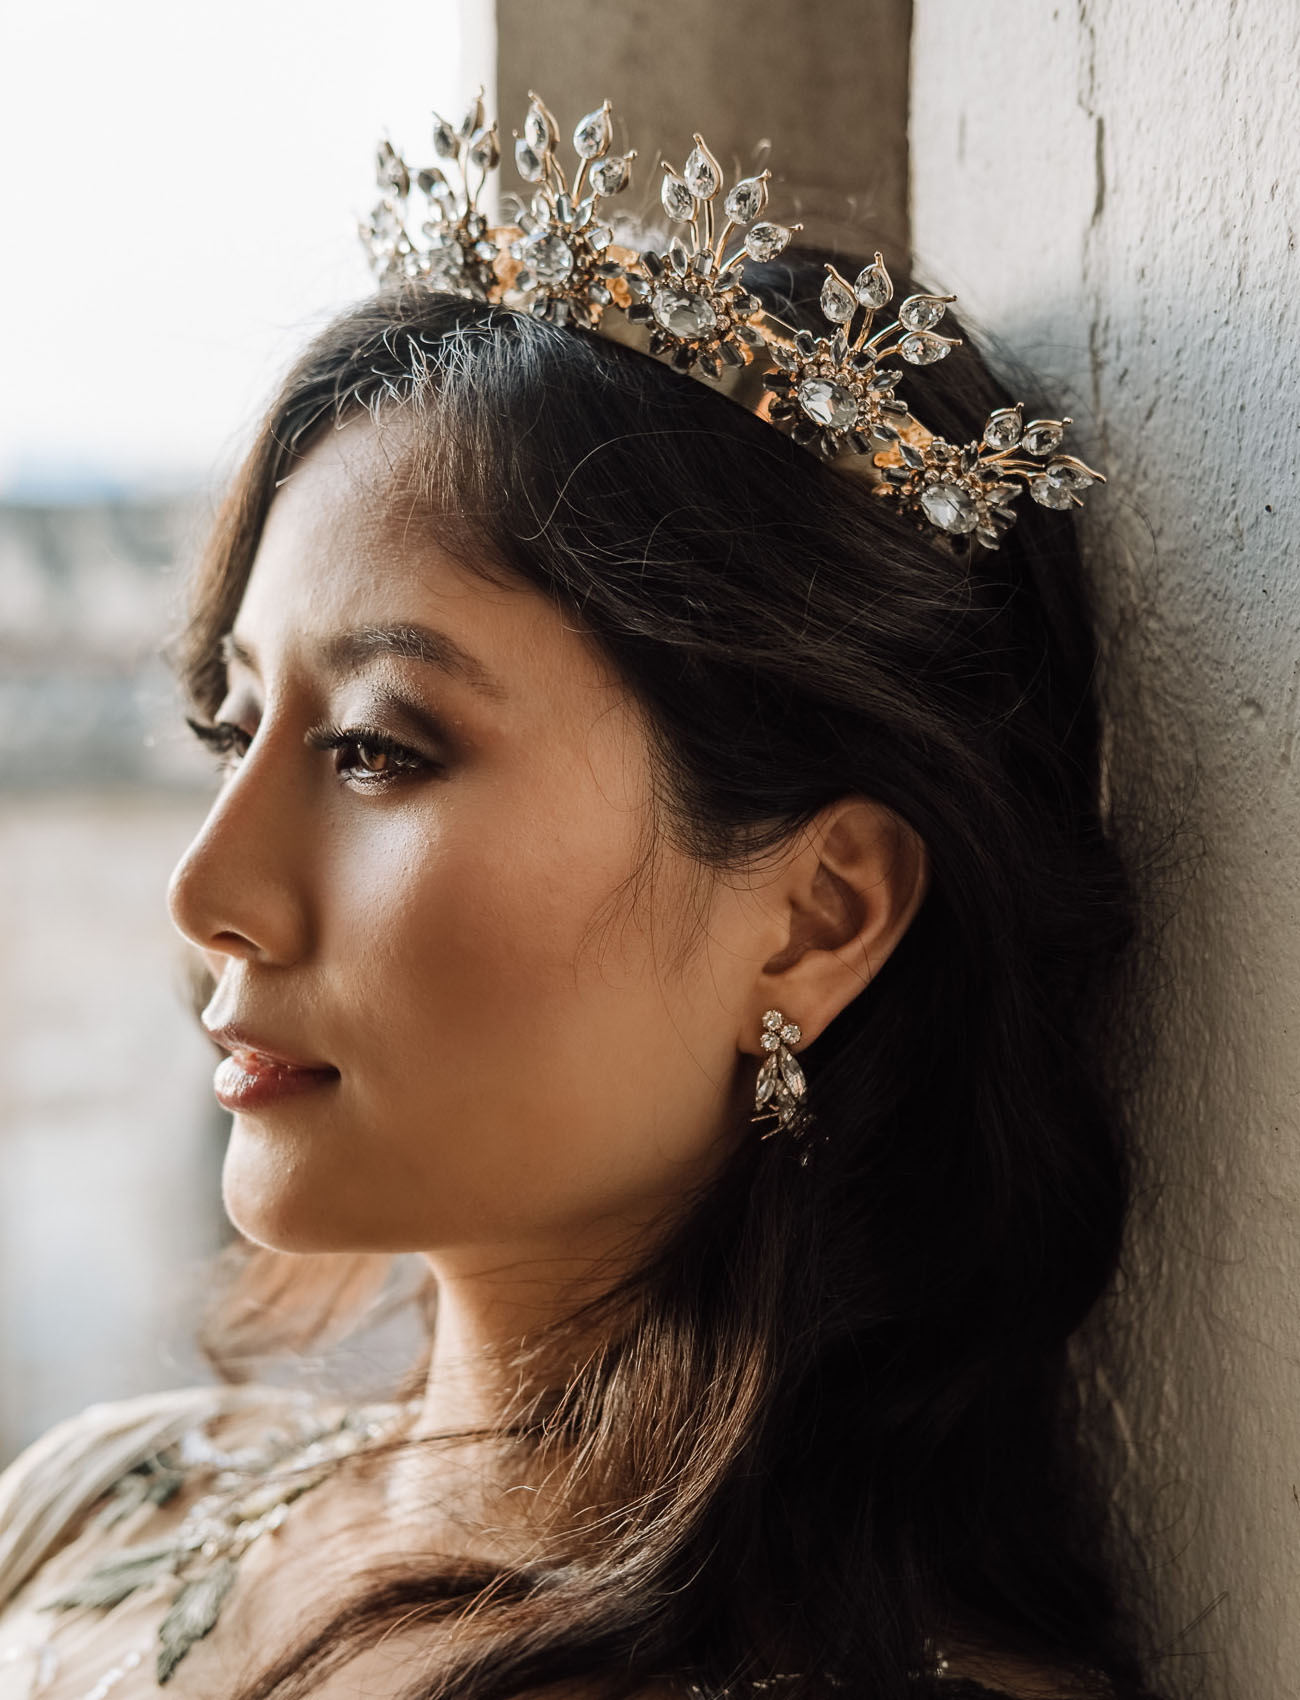 I love the embellished crown the bride was wearing